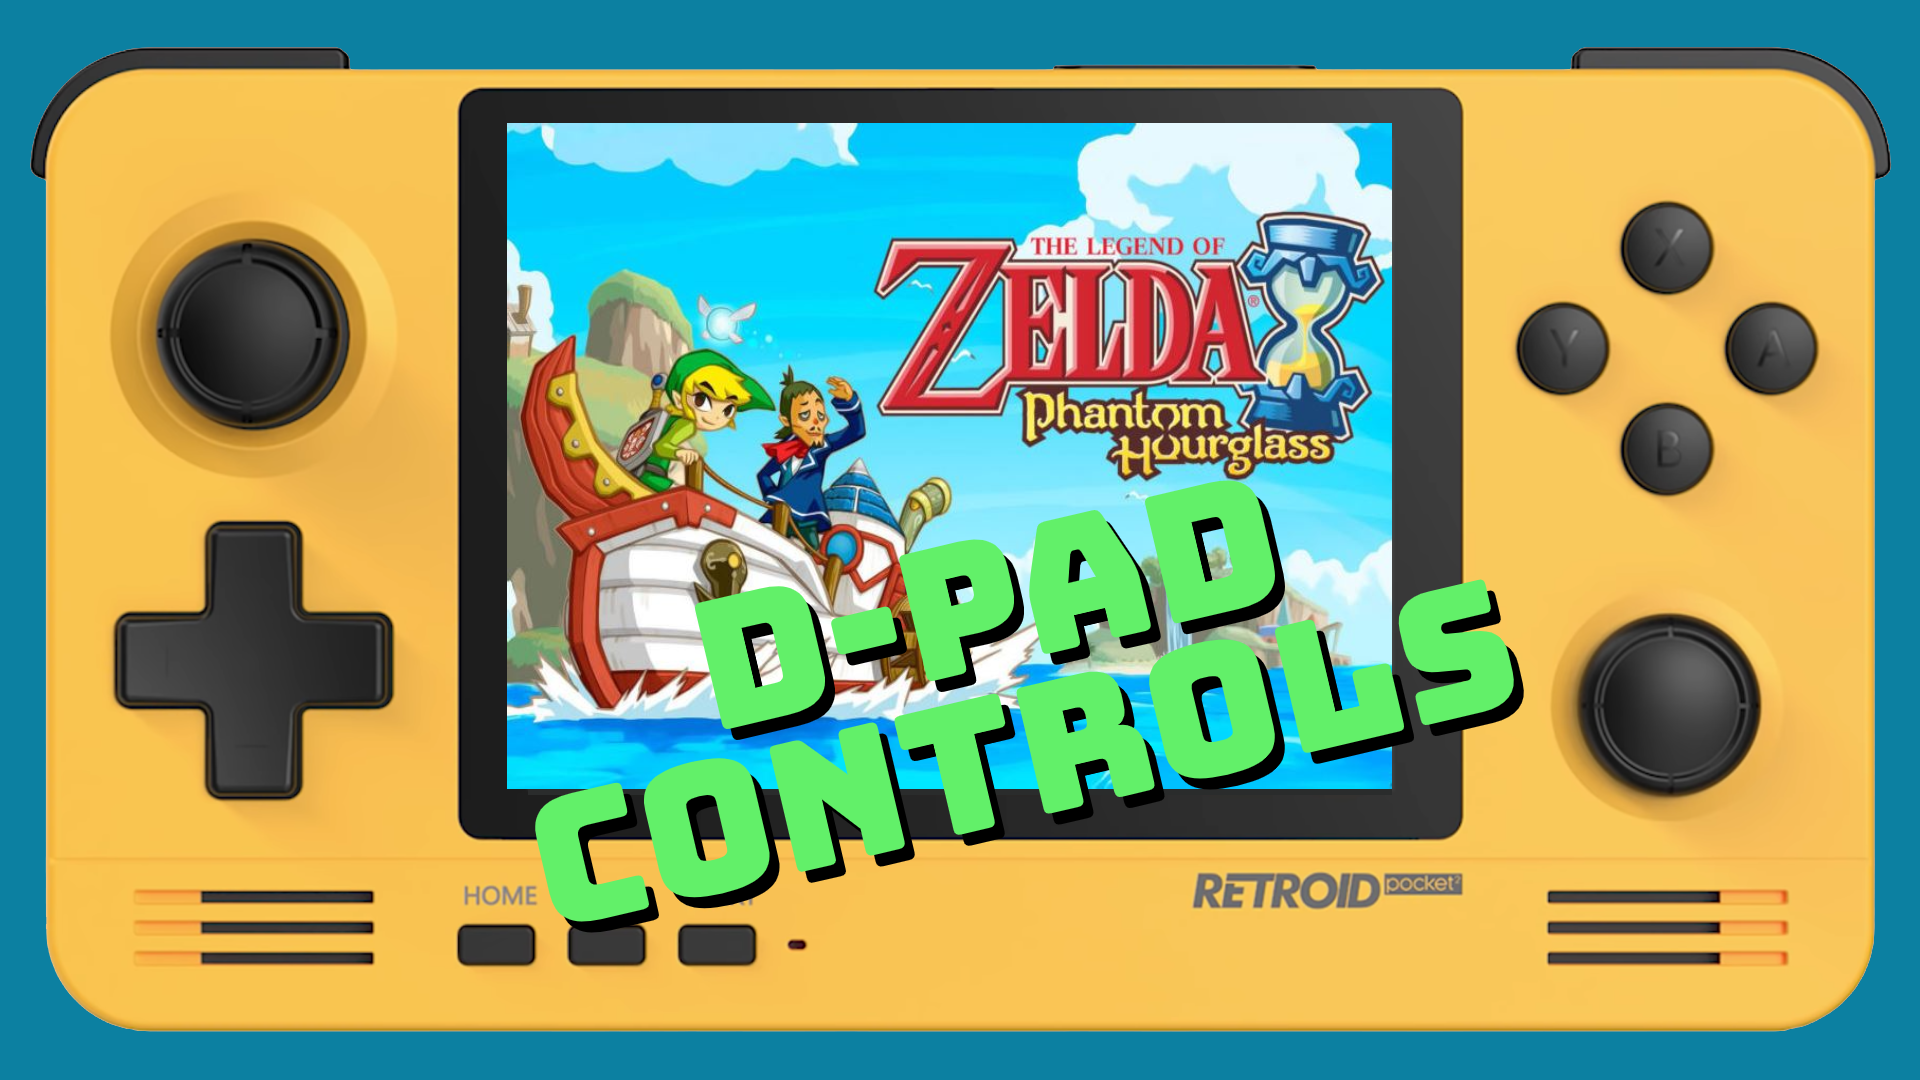 change the controls in the ds emulator for mac